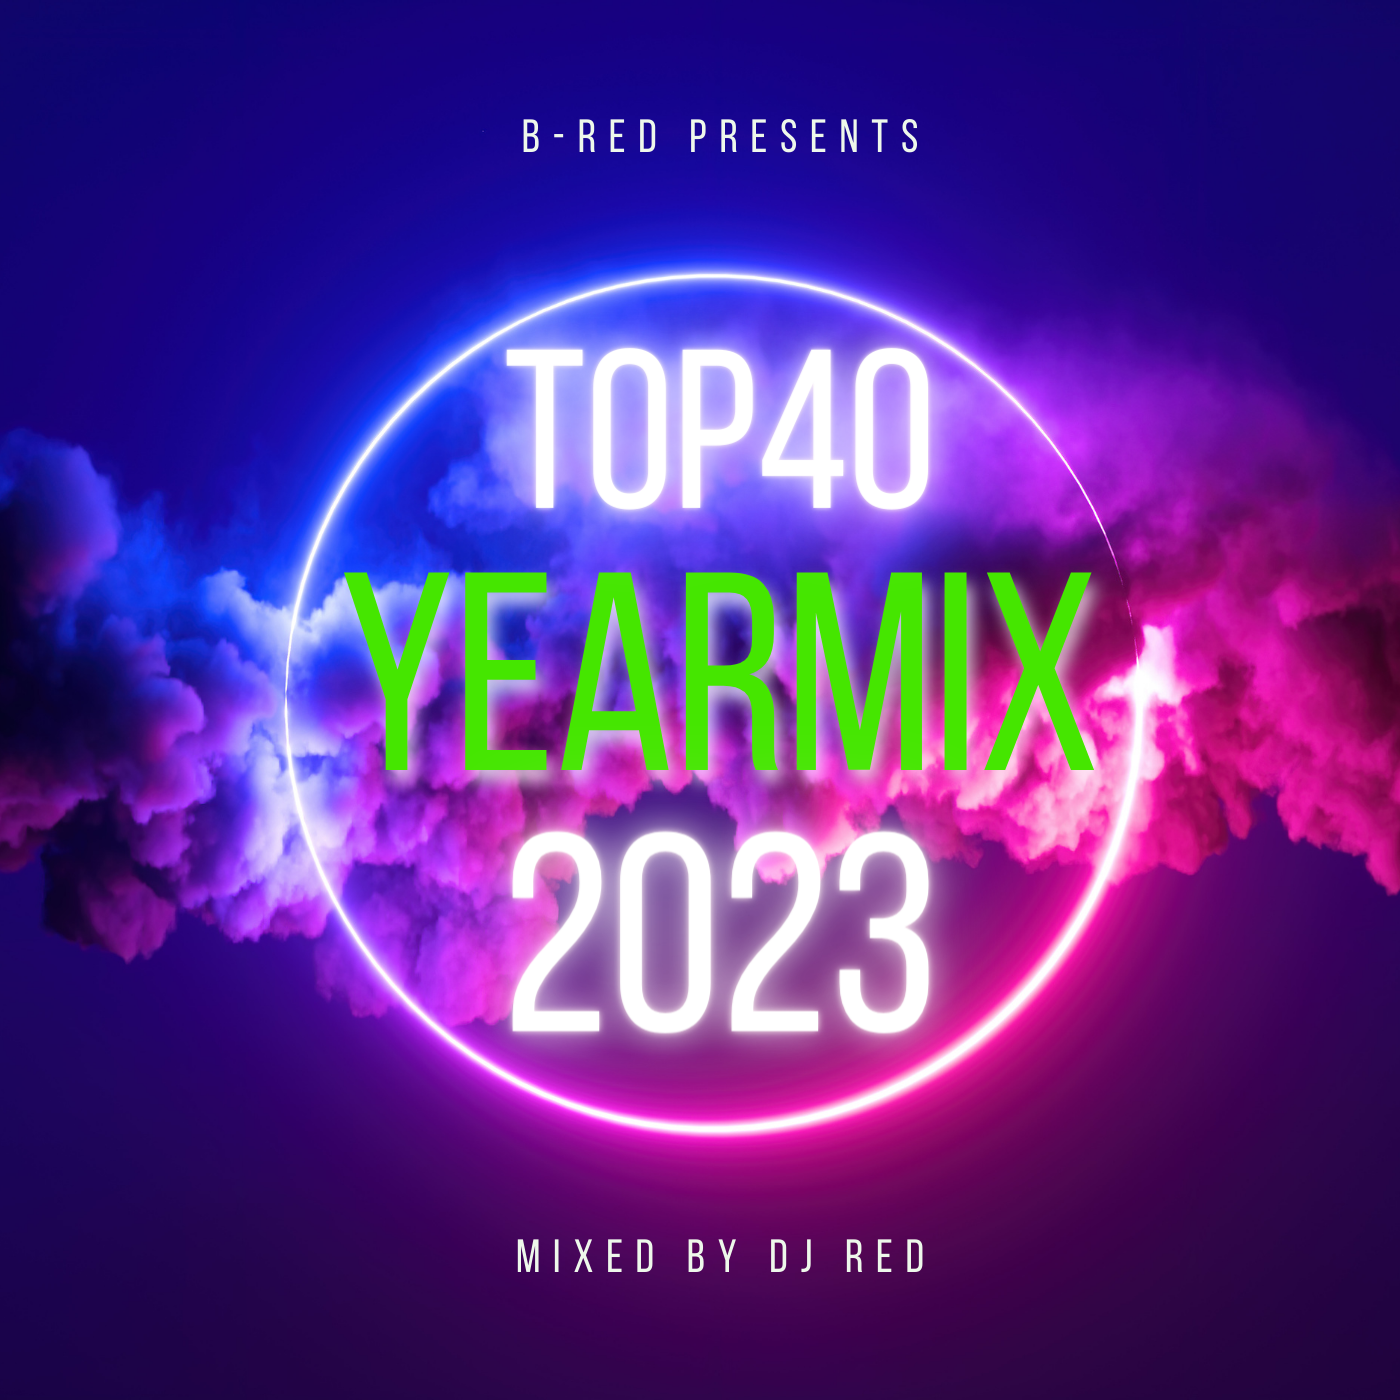 Yearmix 2023 - mixed by DJ RED